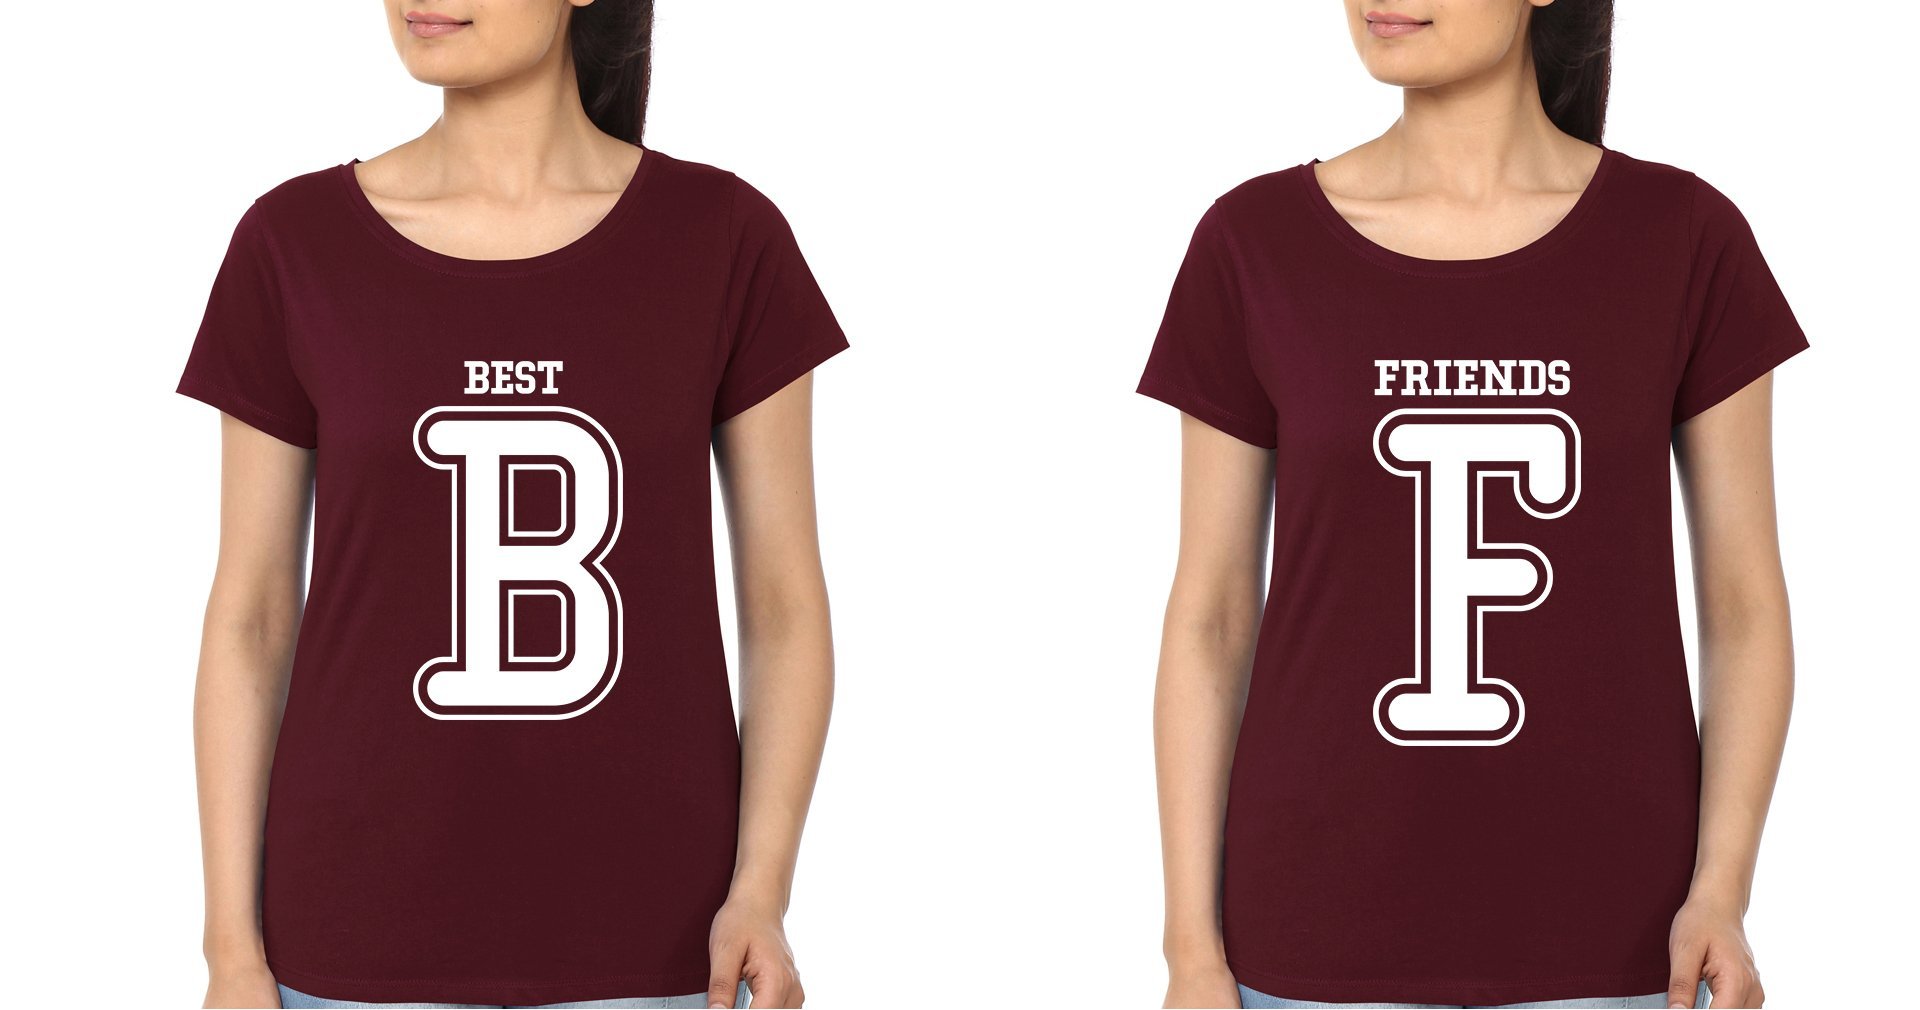 Best Friends BFF Half Sleeves T-Shirts-FunkyTradition - FunkyTradition